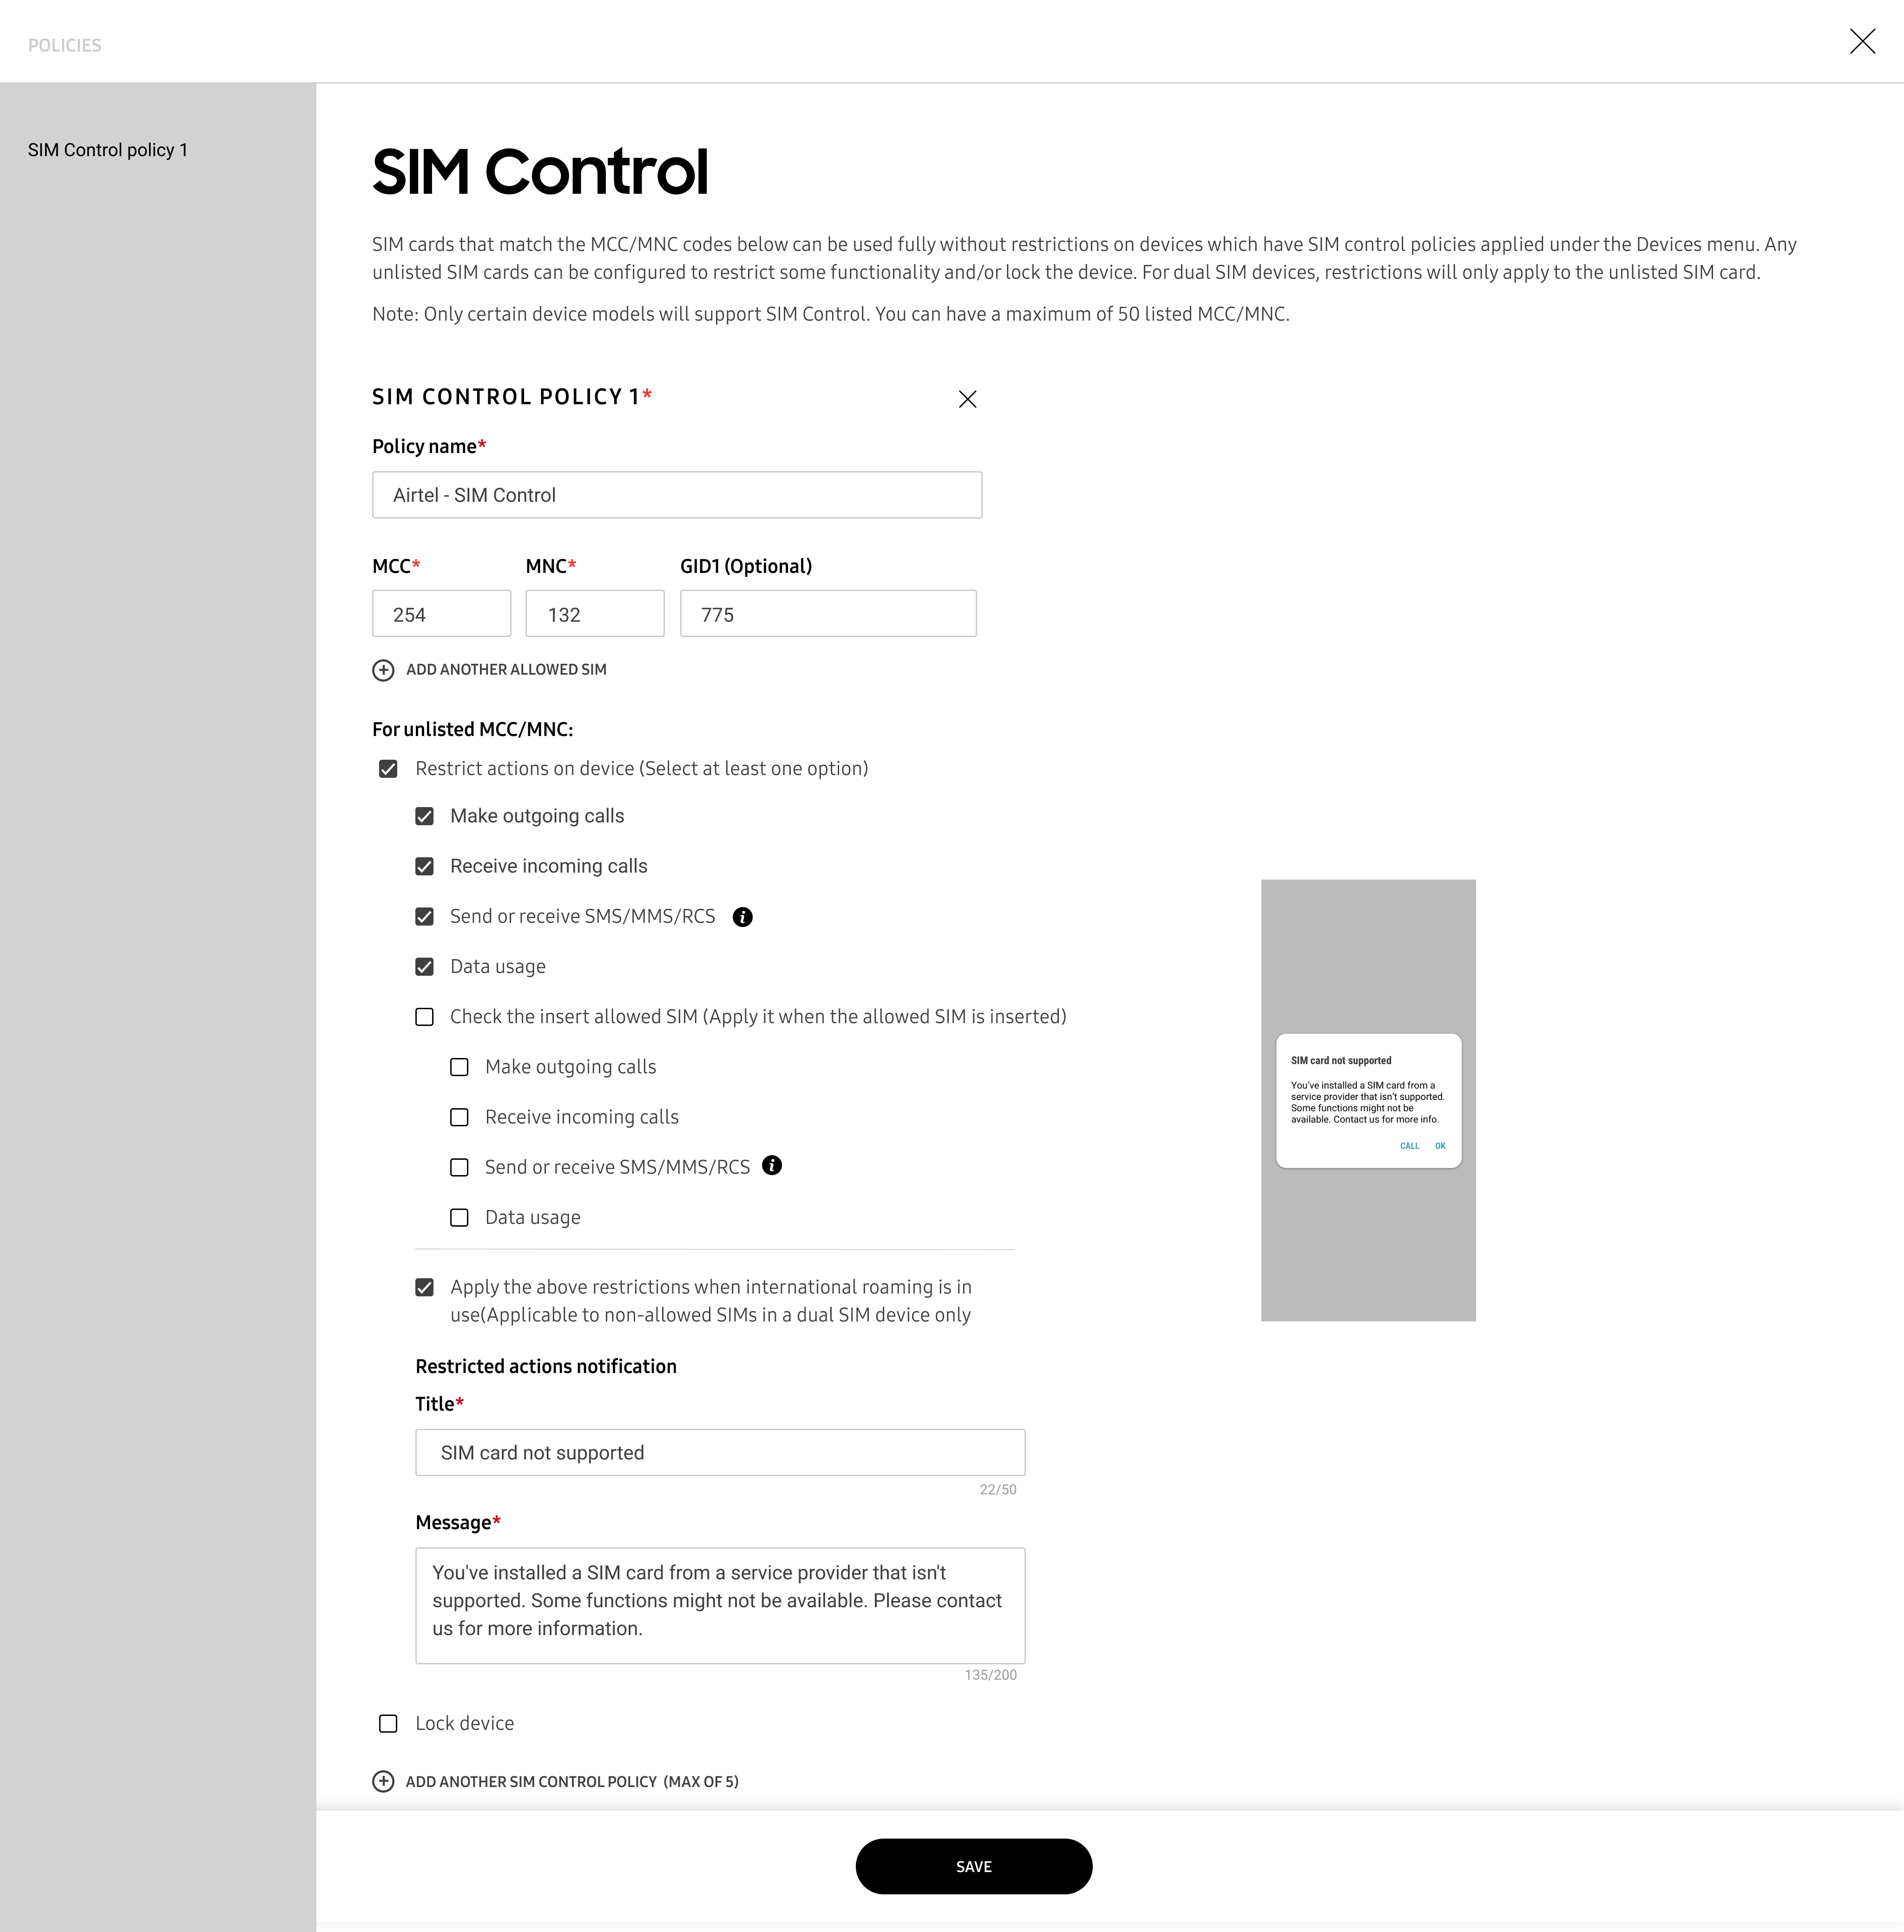 SIM control screen showing policy options